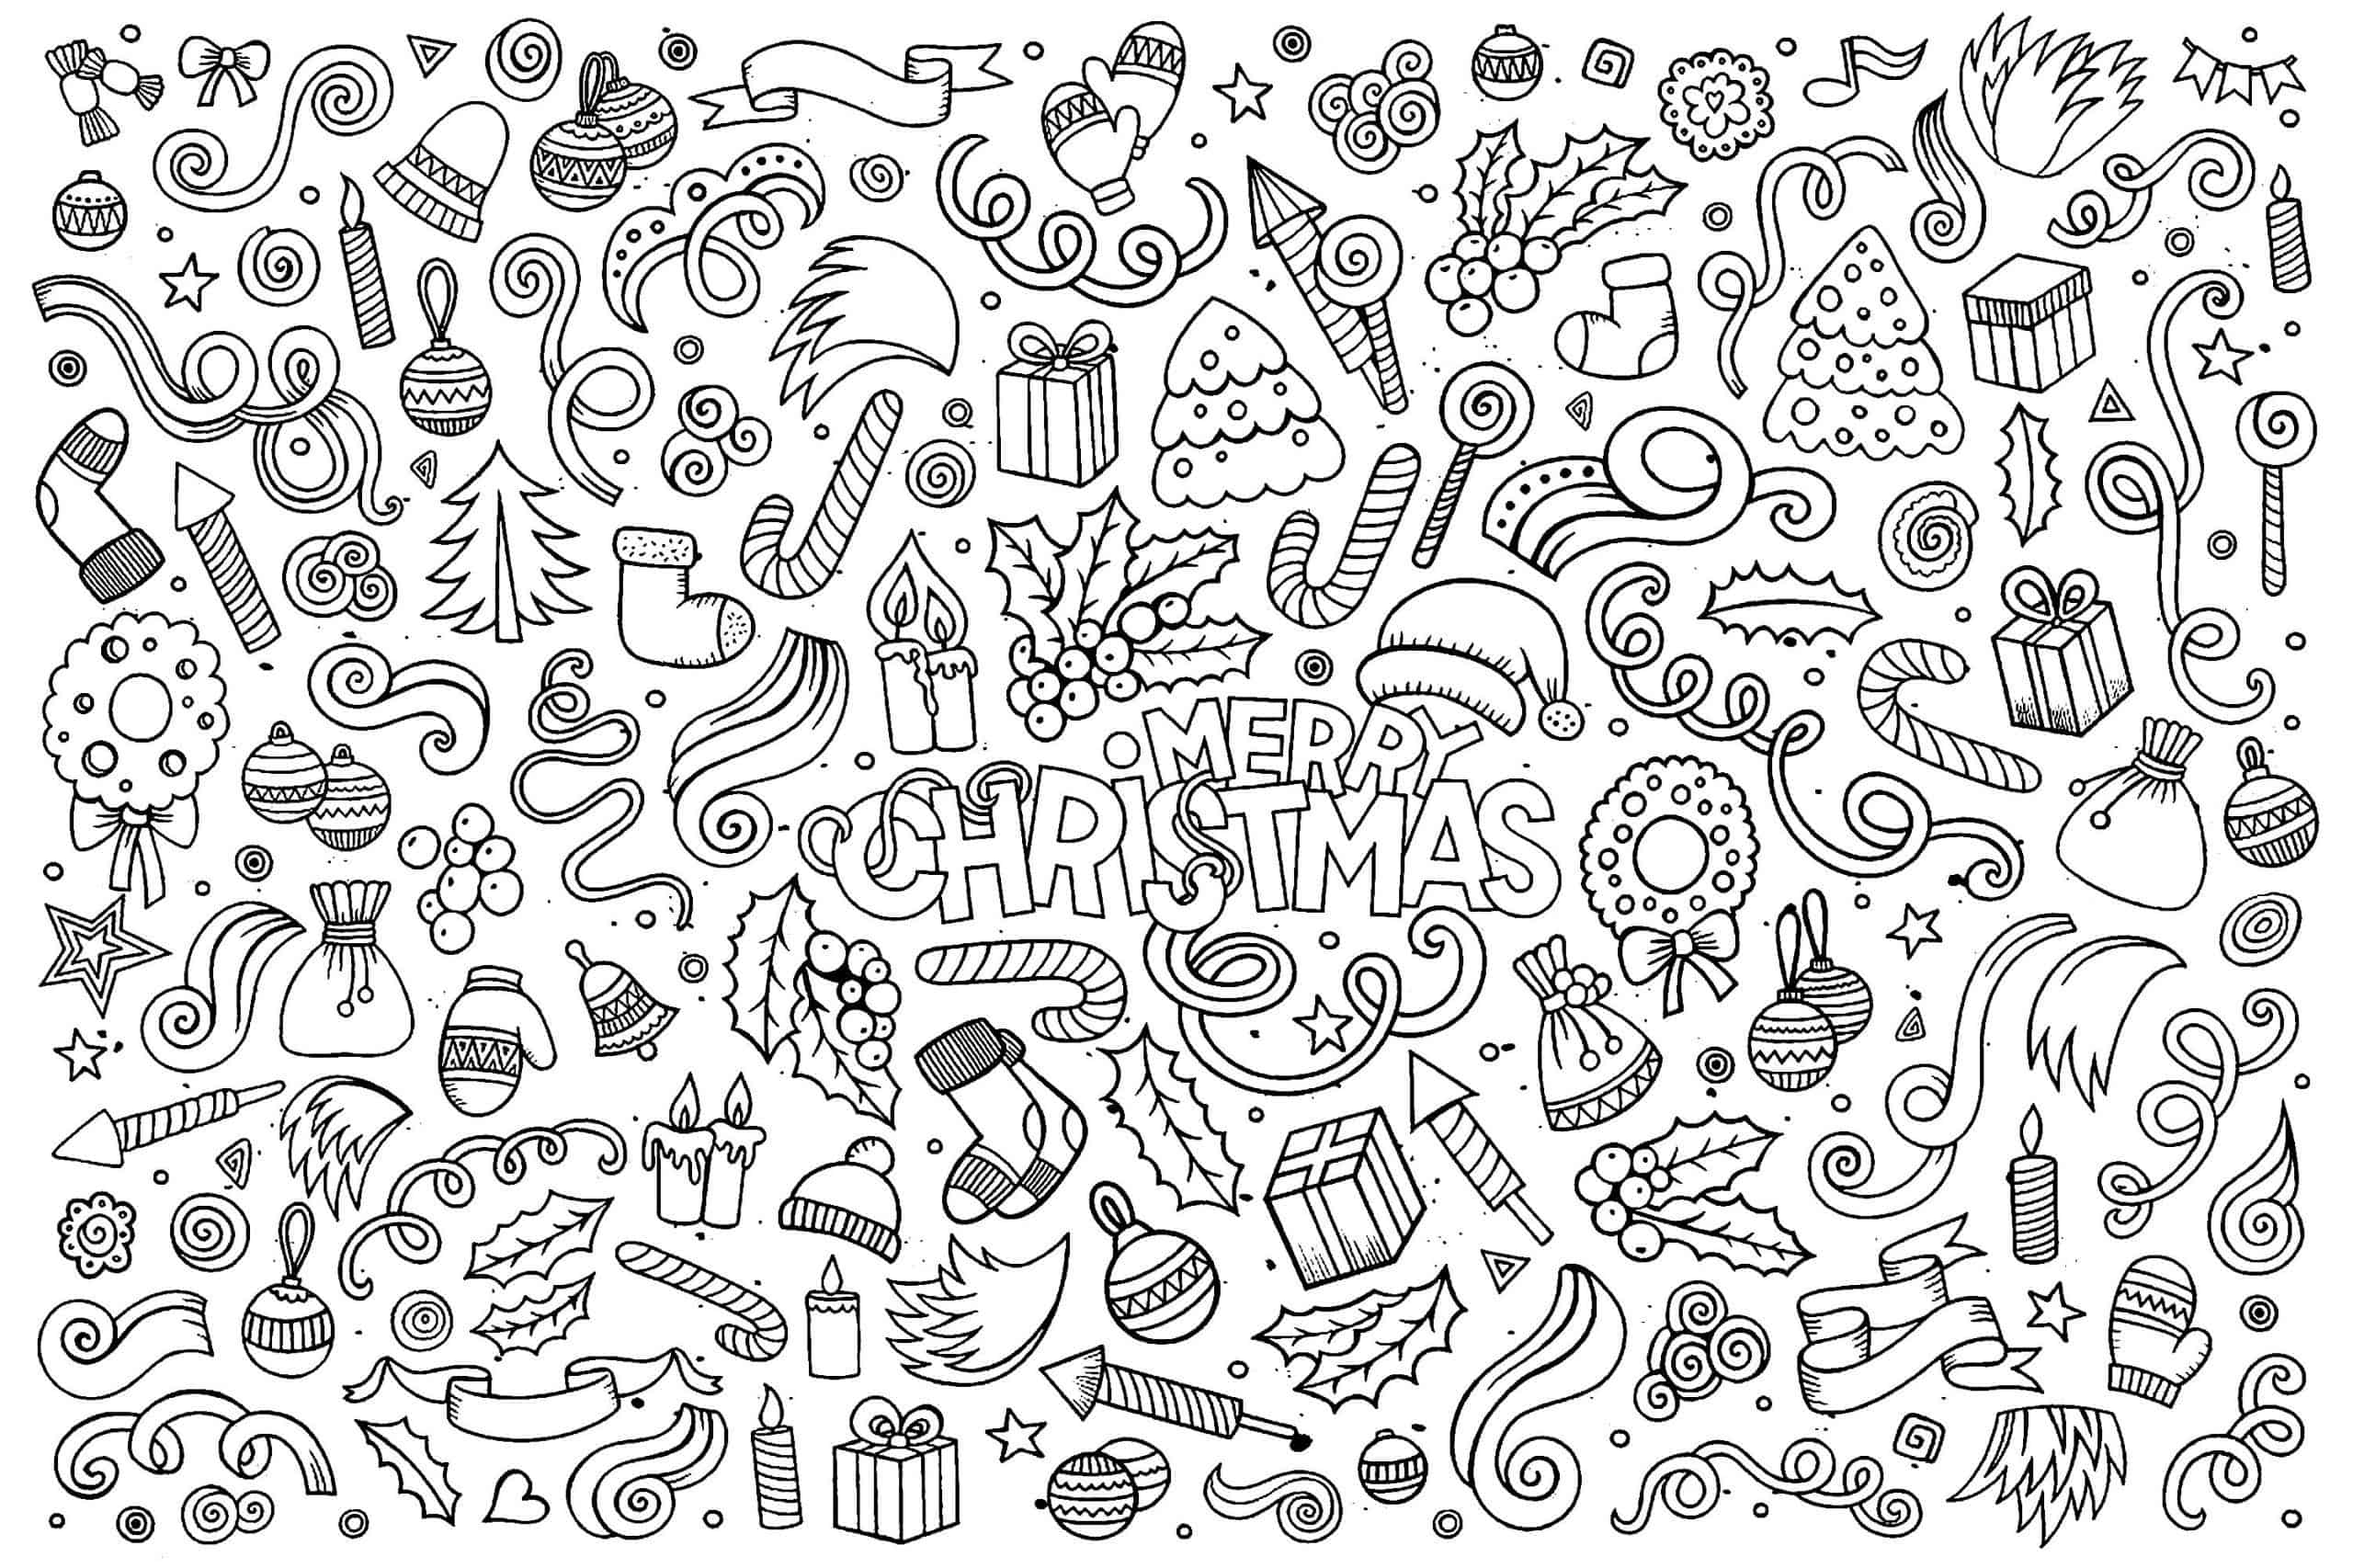 20 Free Adult Christmas Coloring Pages Printables   Artsy Pretty ...